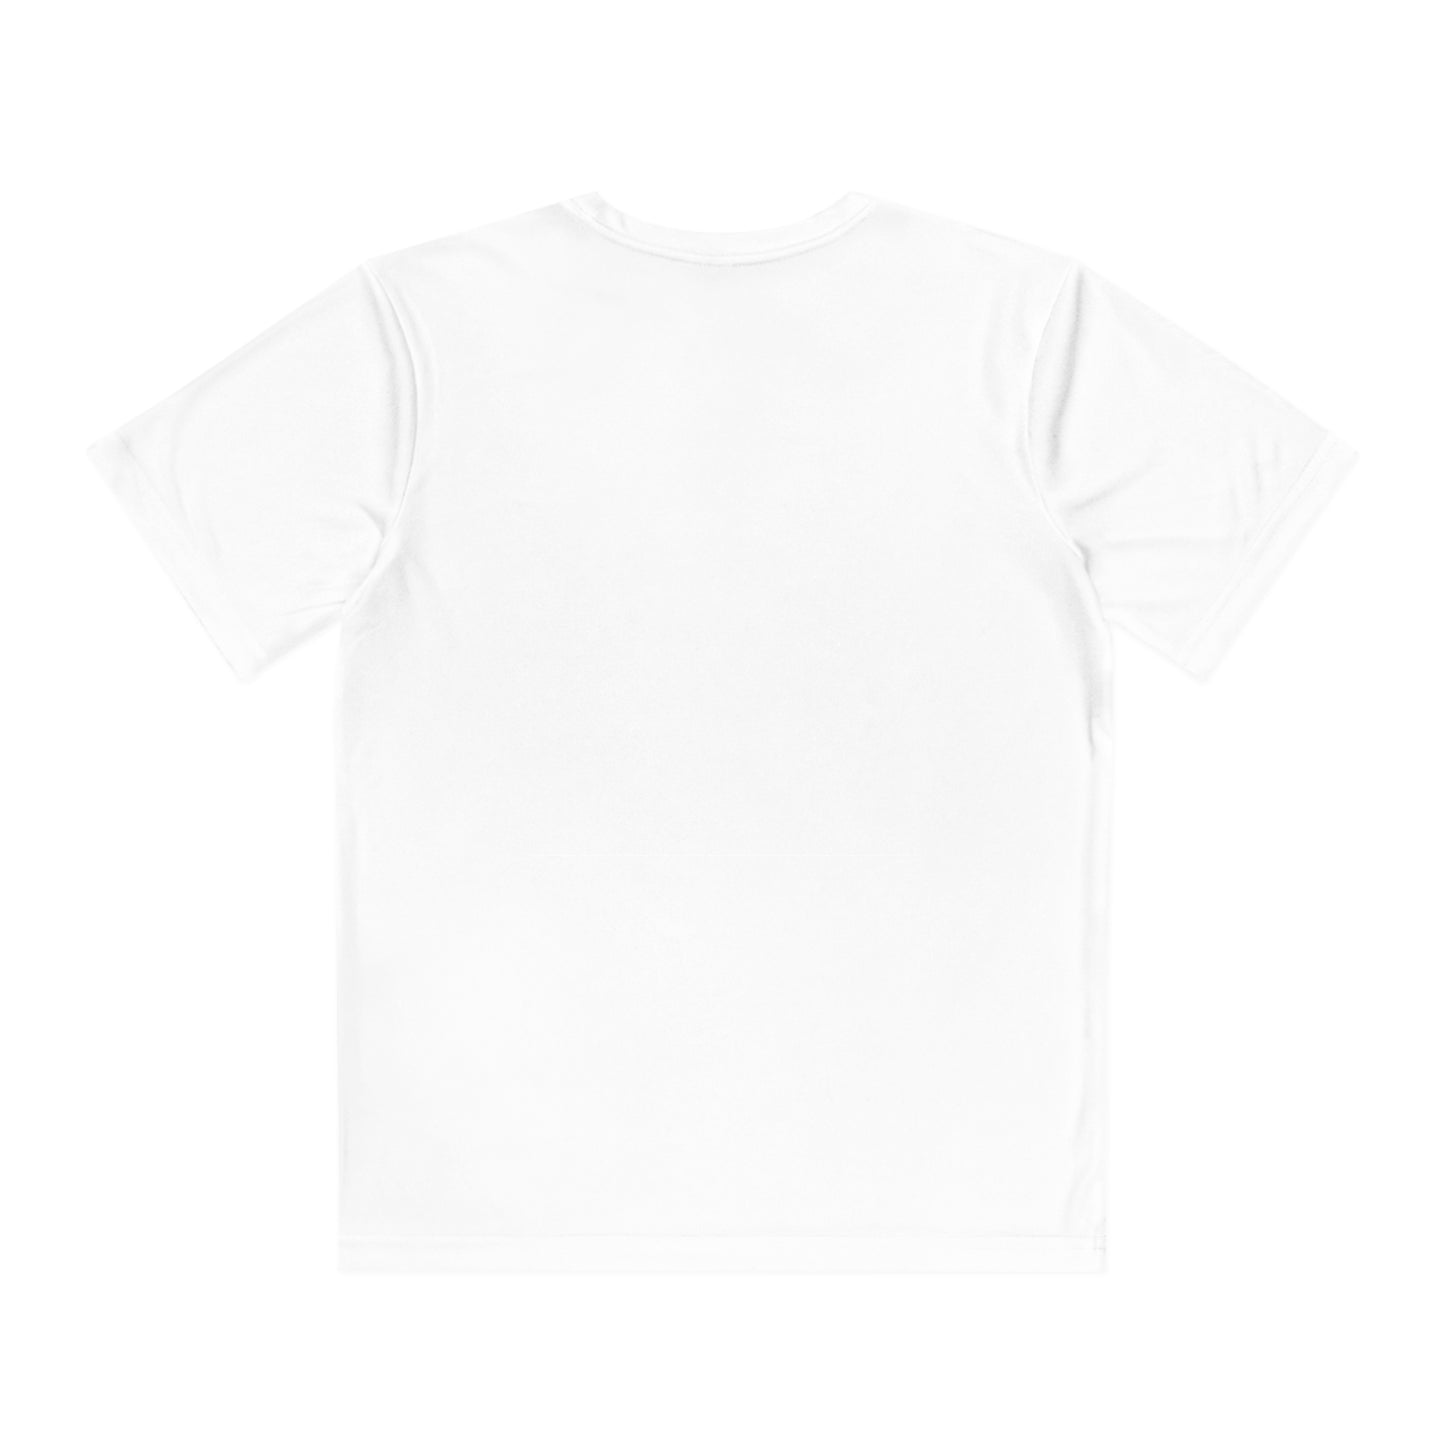 Devin Taylor YOUTH Performance Shirt